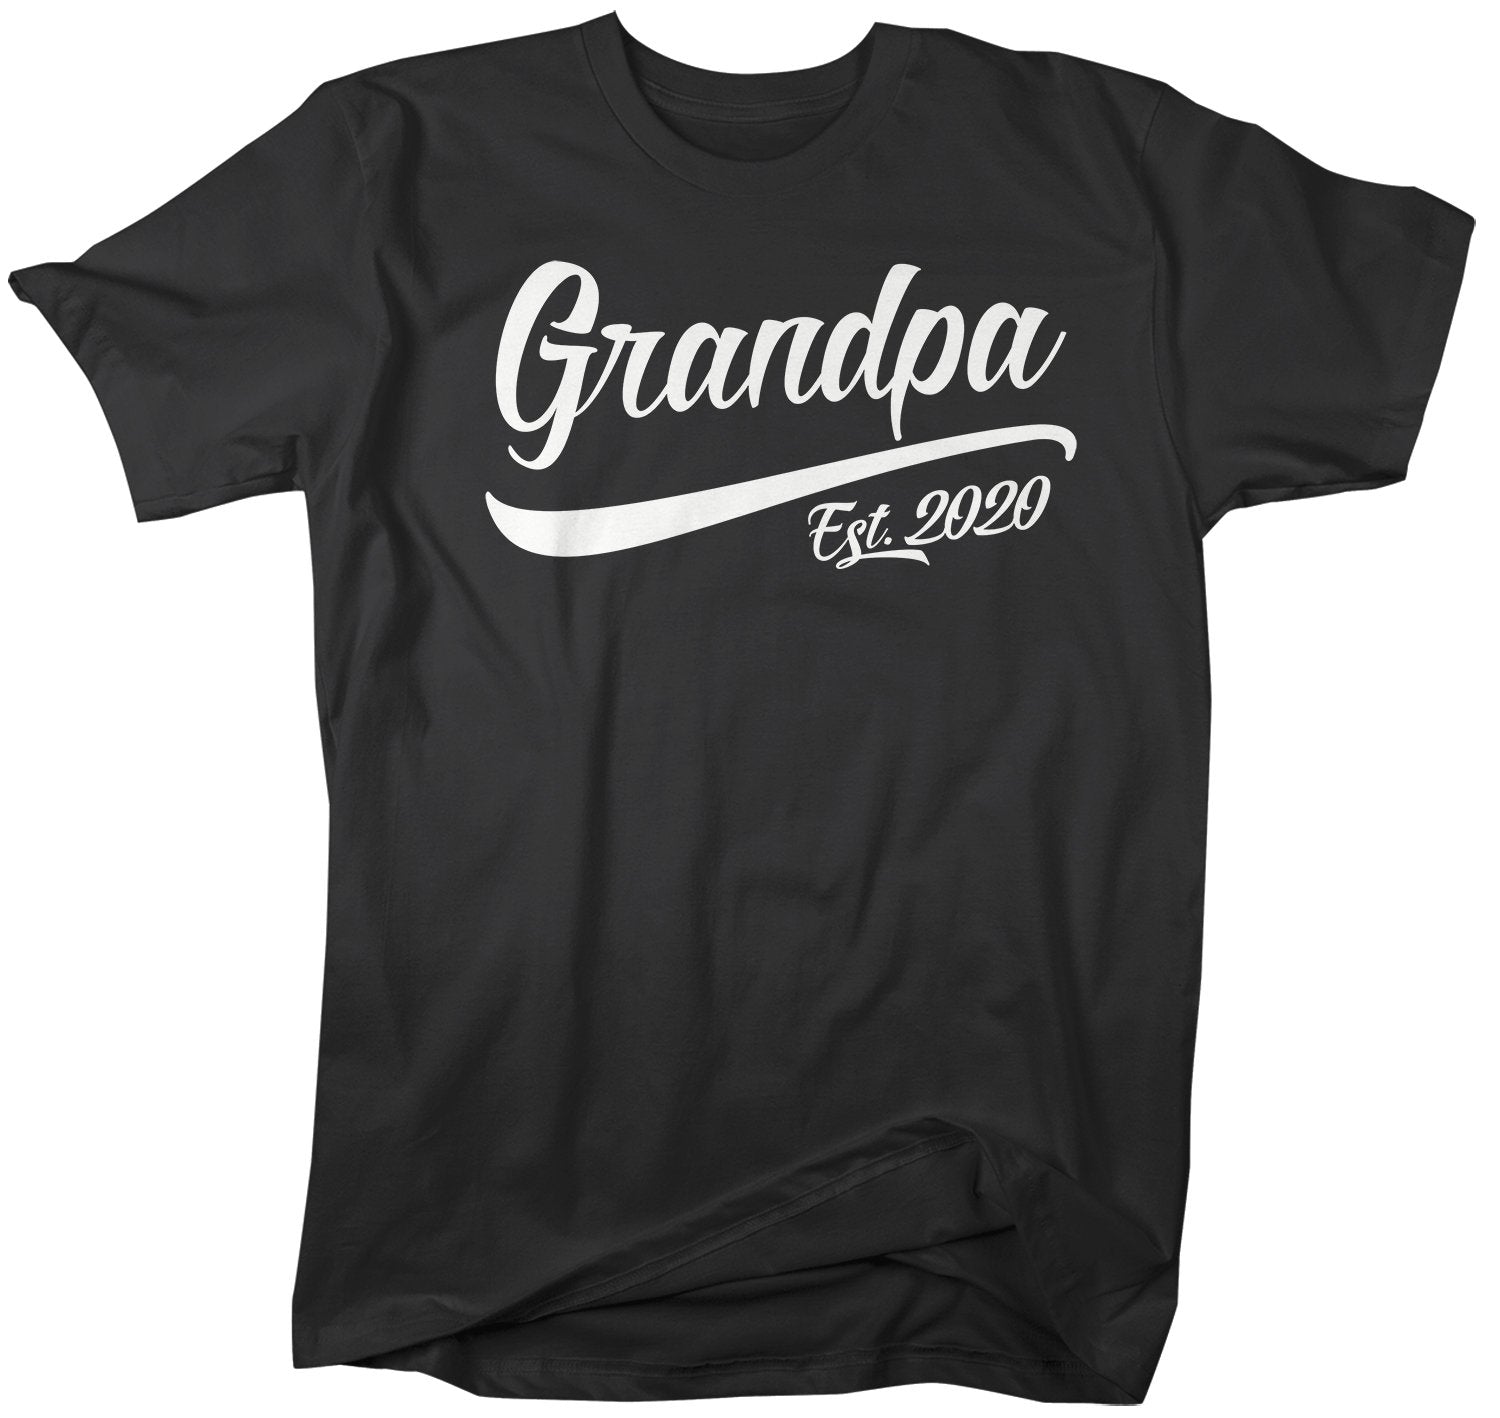 Download Men S Grandpa Gift Est 2020 T Shirt New Baby Reveal Idea Gift Father Shirts By Sarah